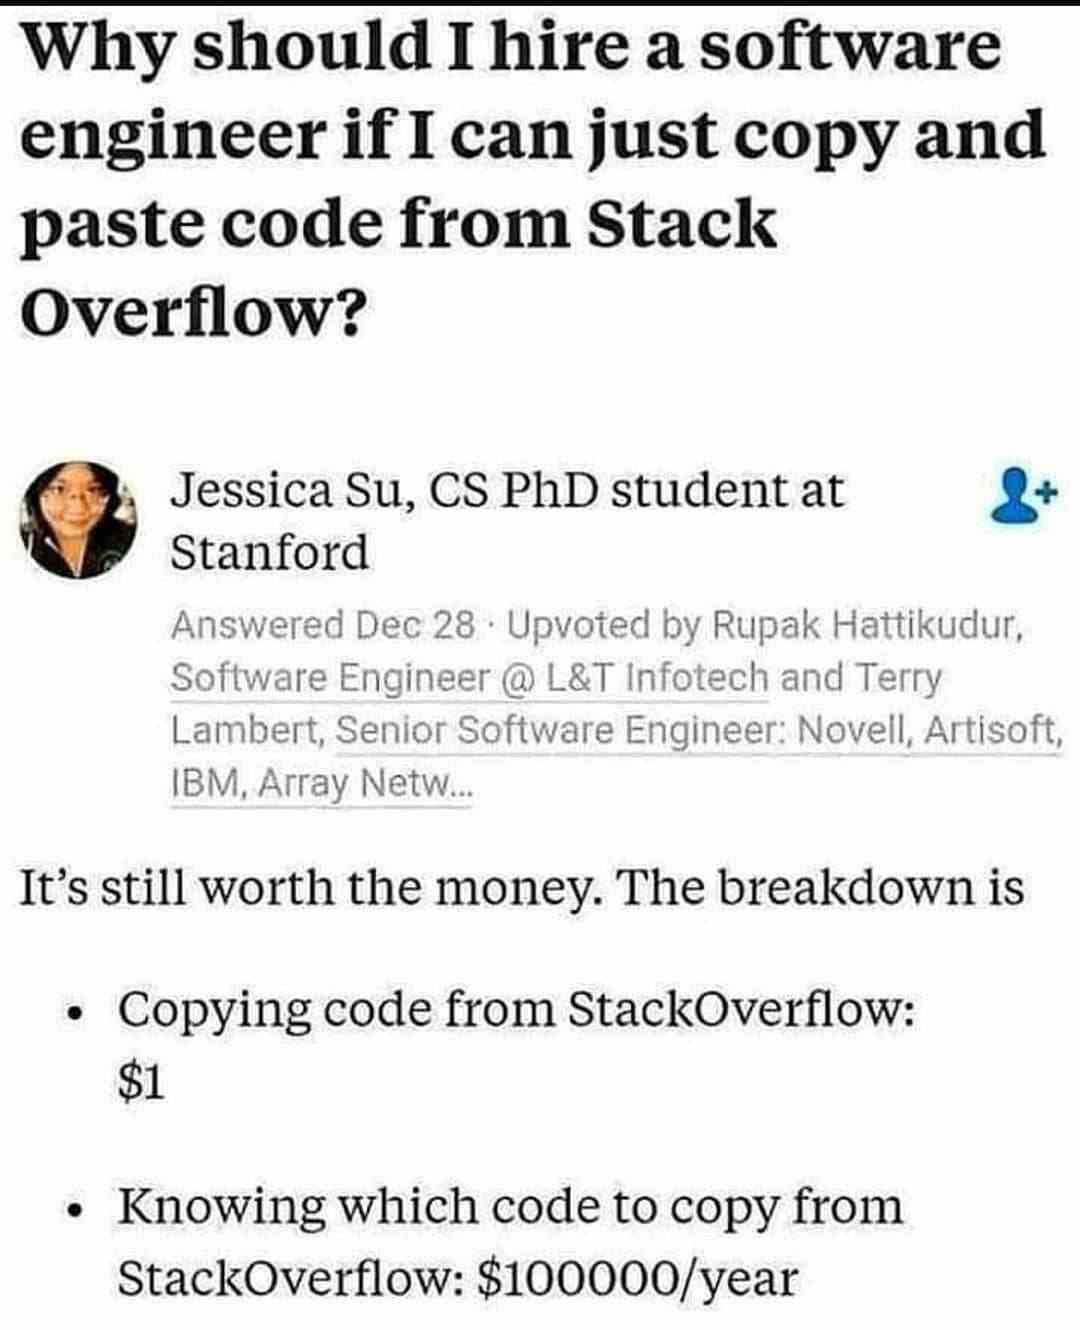 Why should i hire a software engineer if i can just copy and paste code from stack overflow?